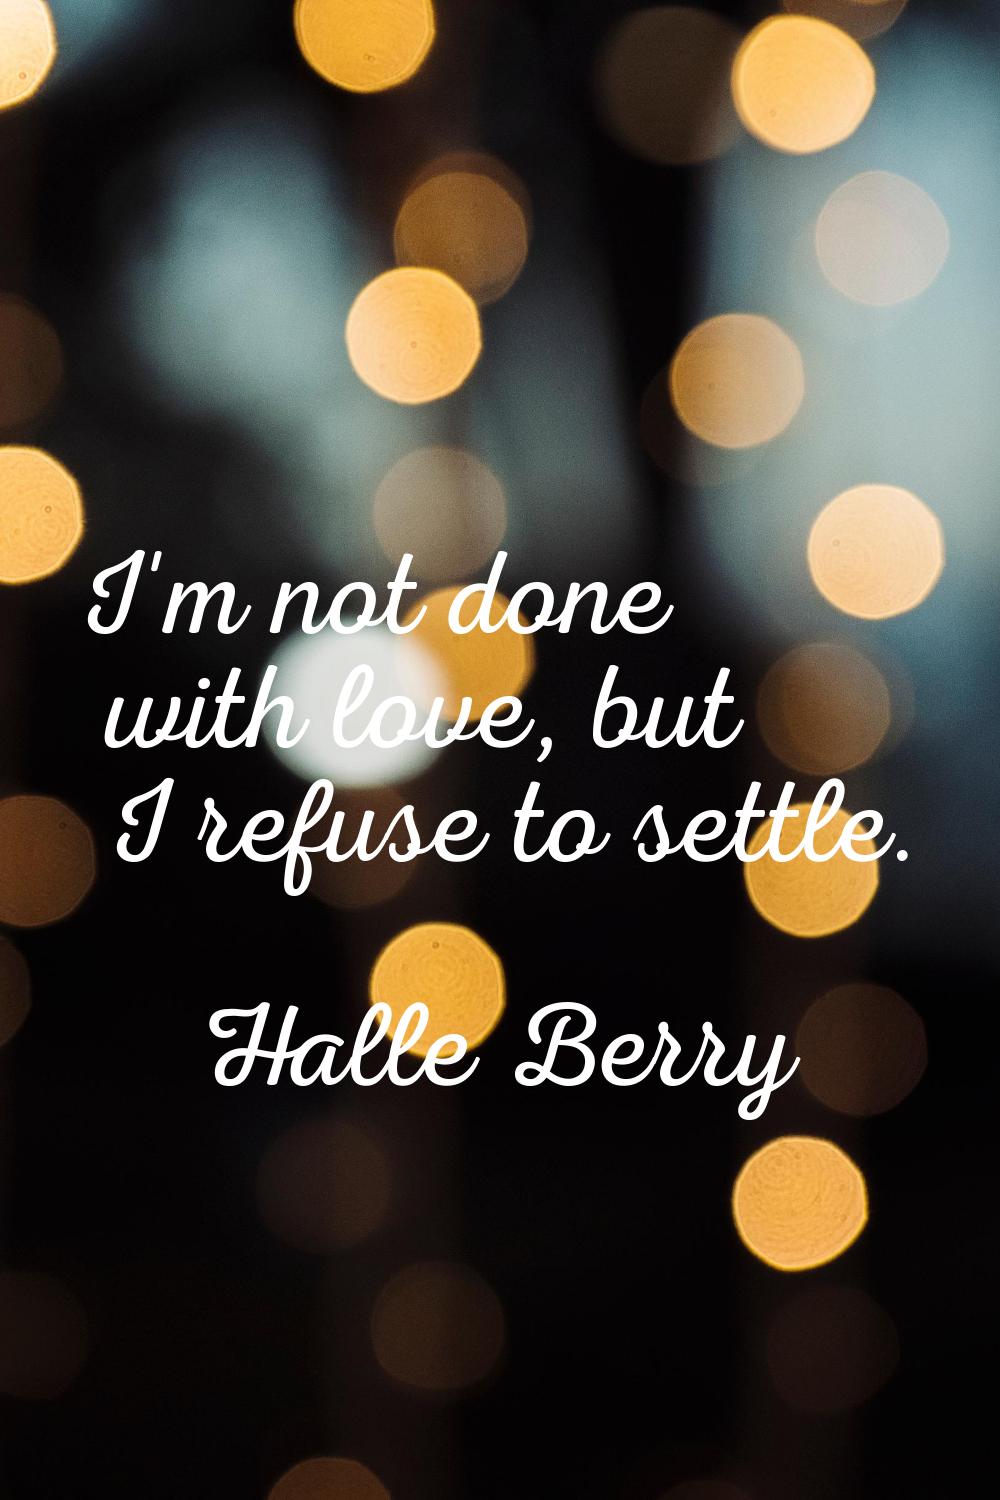 I'm not done with love, but I refuse to settle.